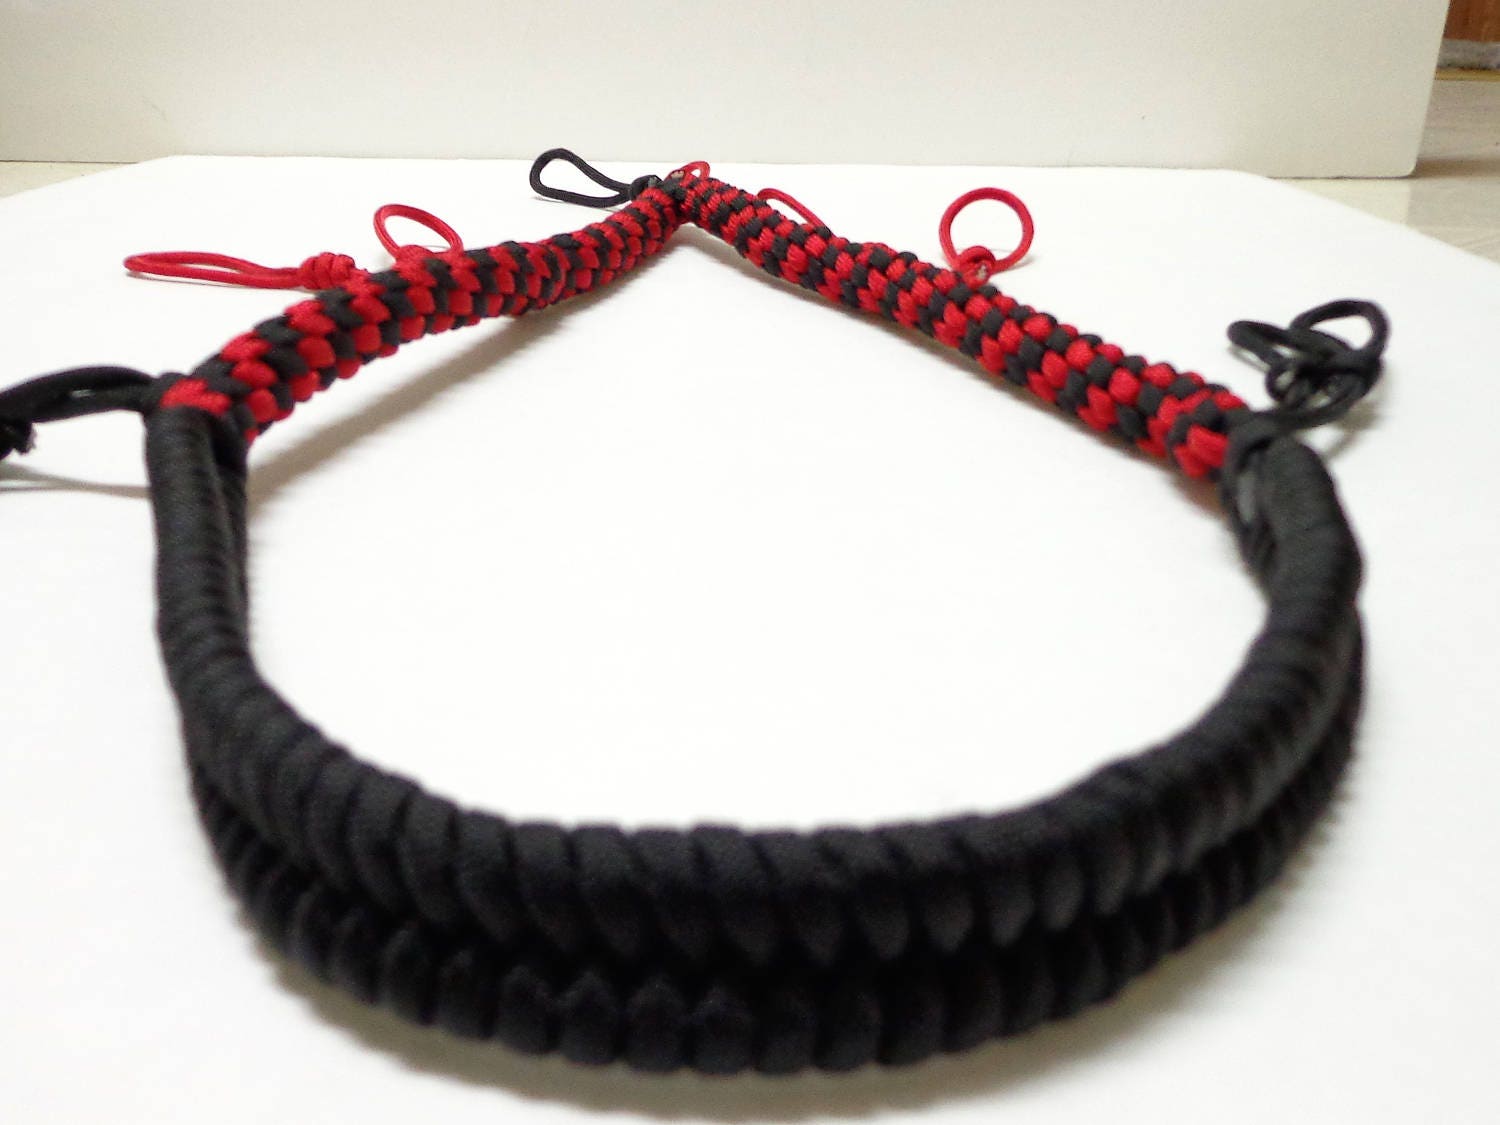 The DOUBLE WIDE paracord lanyard – Custom Call Lanyards